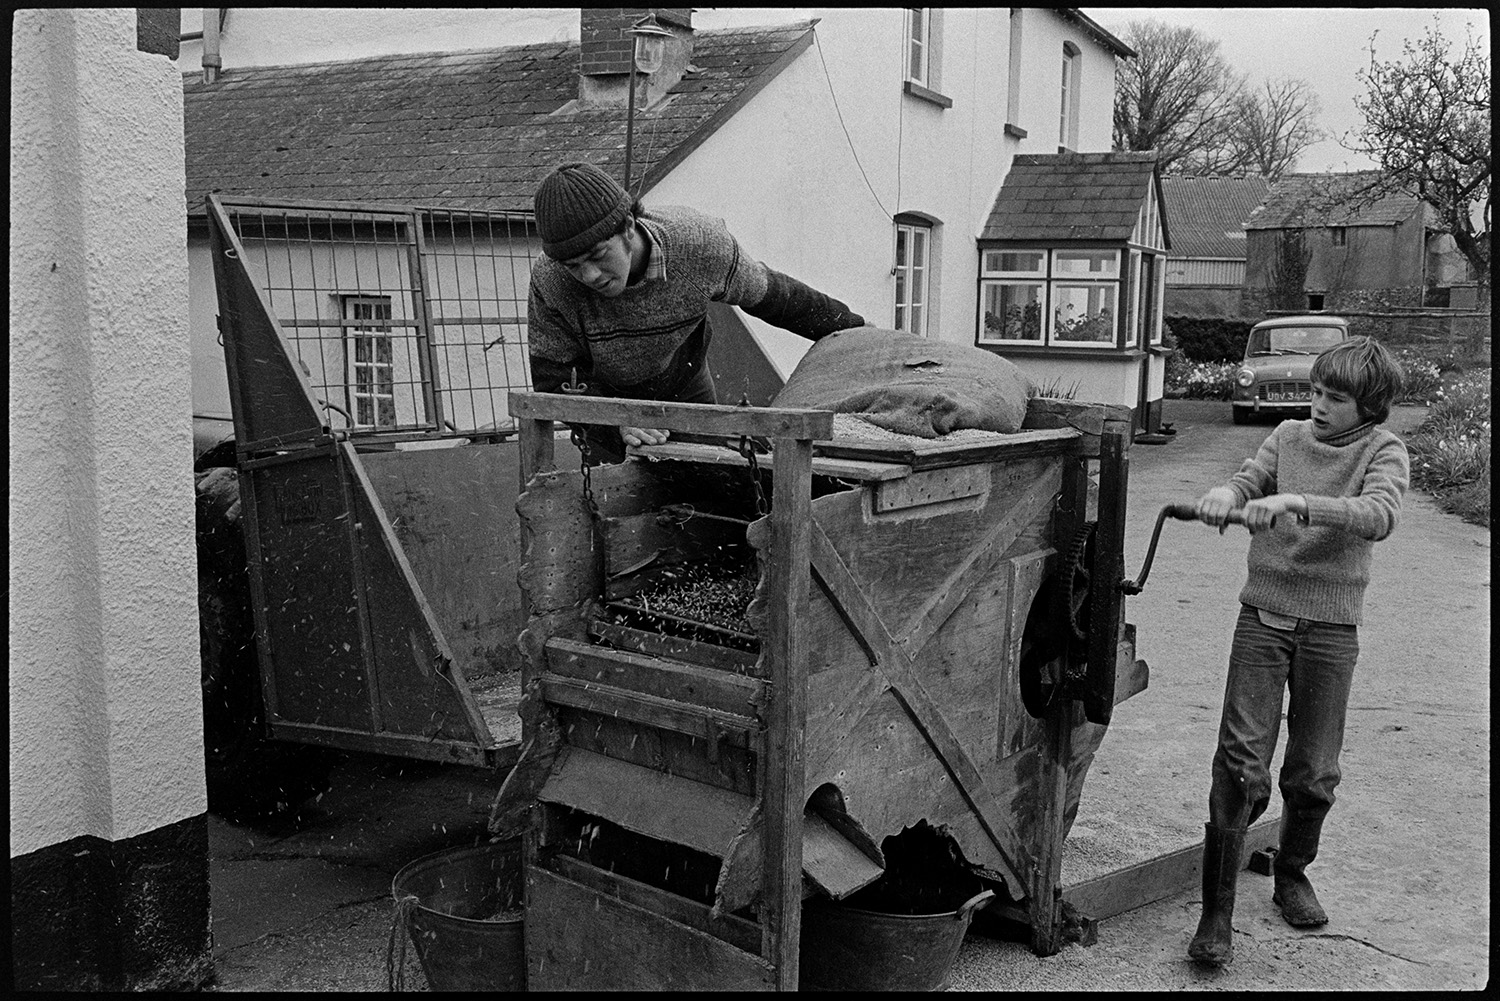 Men operating old crusher, hand operated. 
[David or Graham Ward and a boy using a grain crusher at Parsonage, Iddesleigh. The boy is turning the handle to work the crusher while the other man is checking the crusher. The farmhouse and a parked car can be seen in the background.]